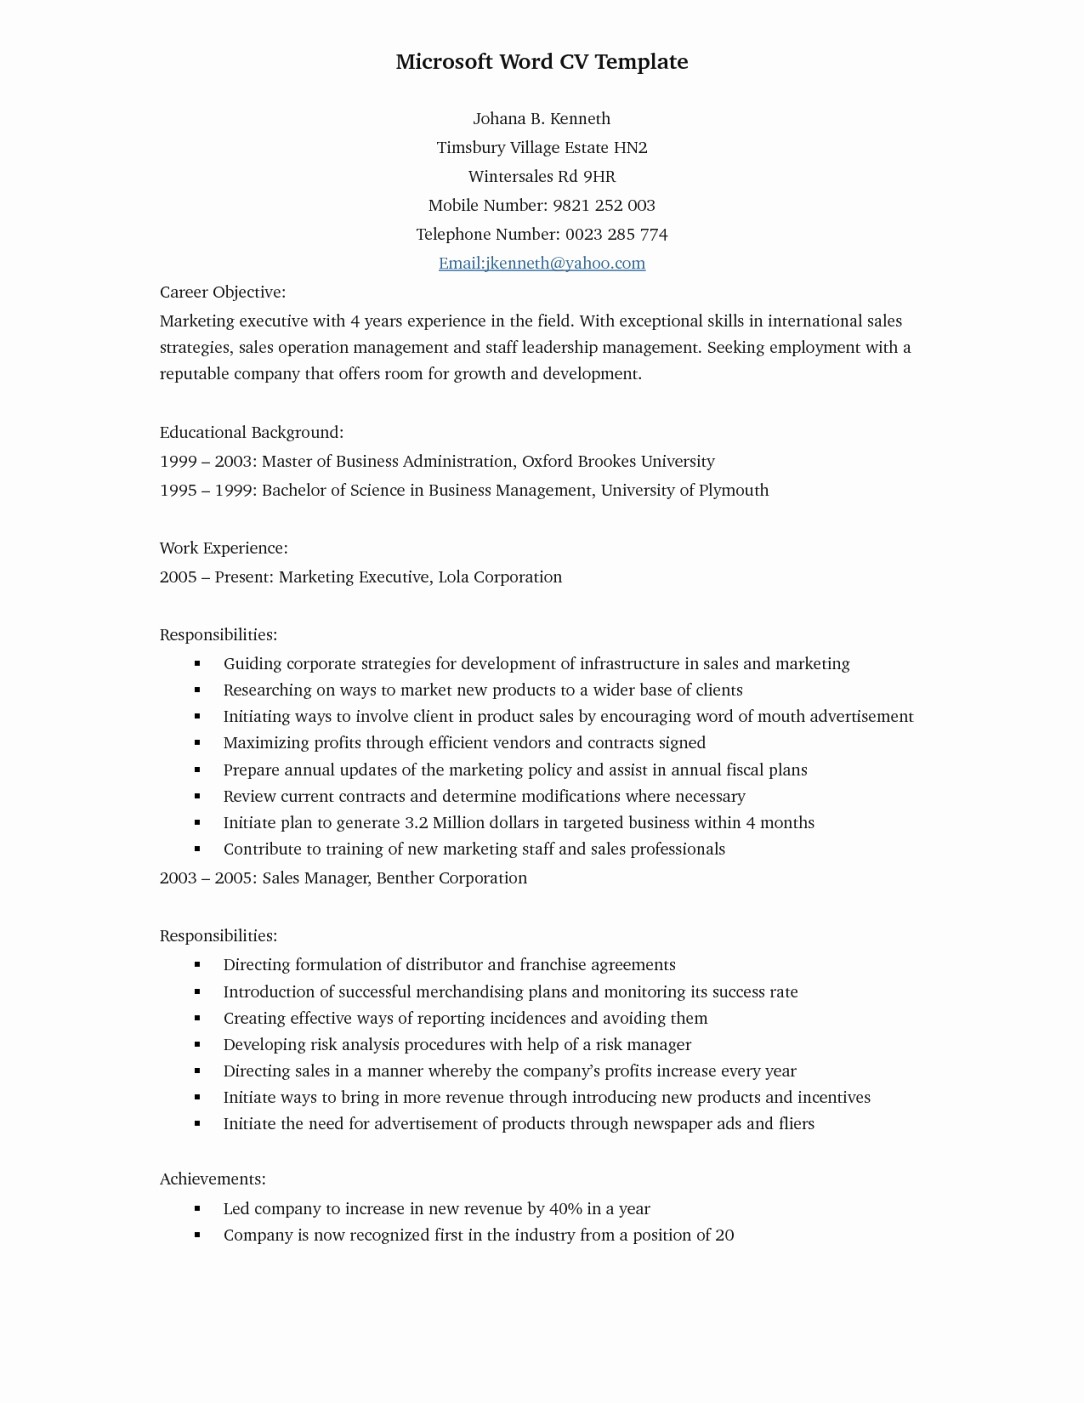 Sample Resume In Word format Awesome Resume Template Microsoft Word 2017